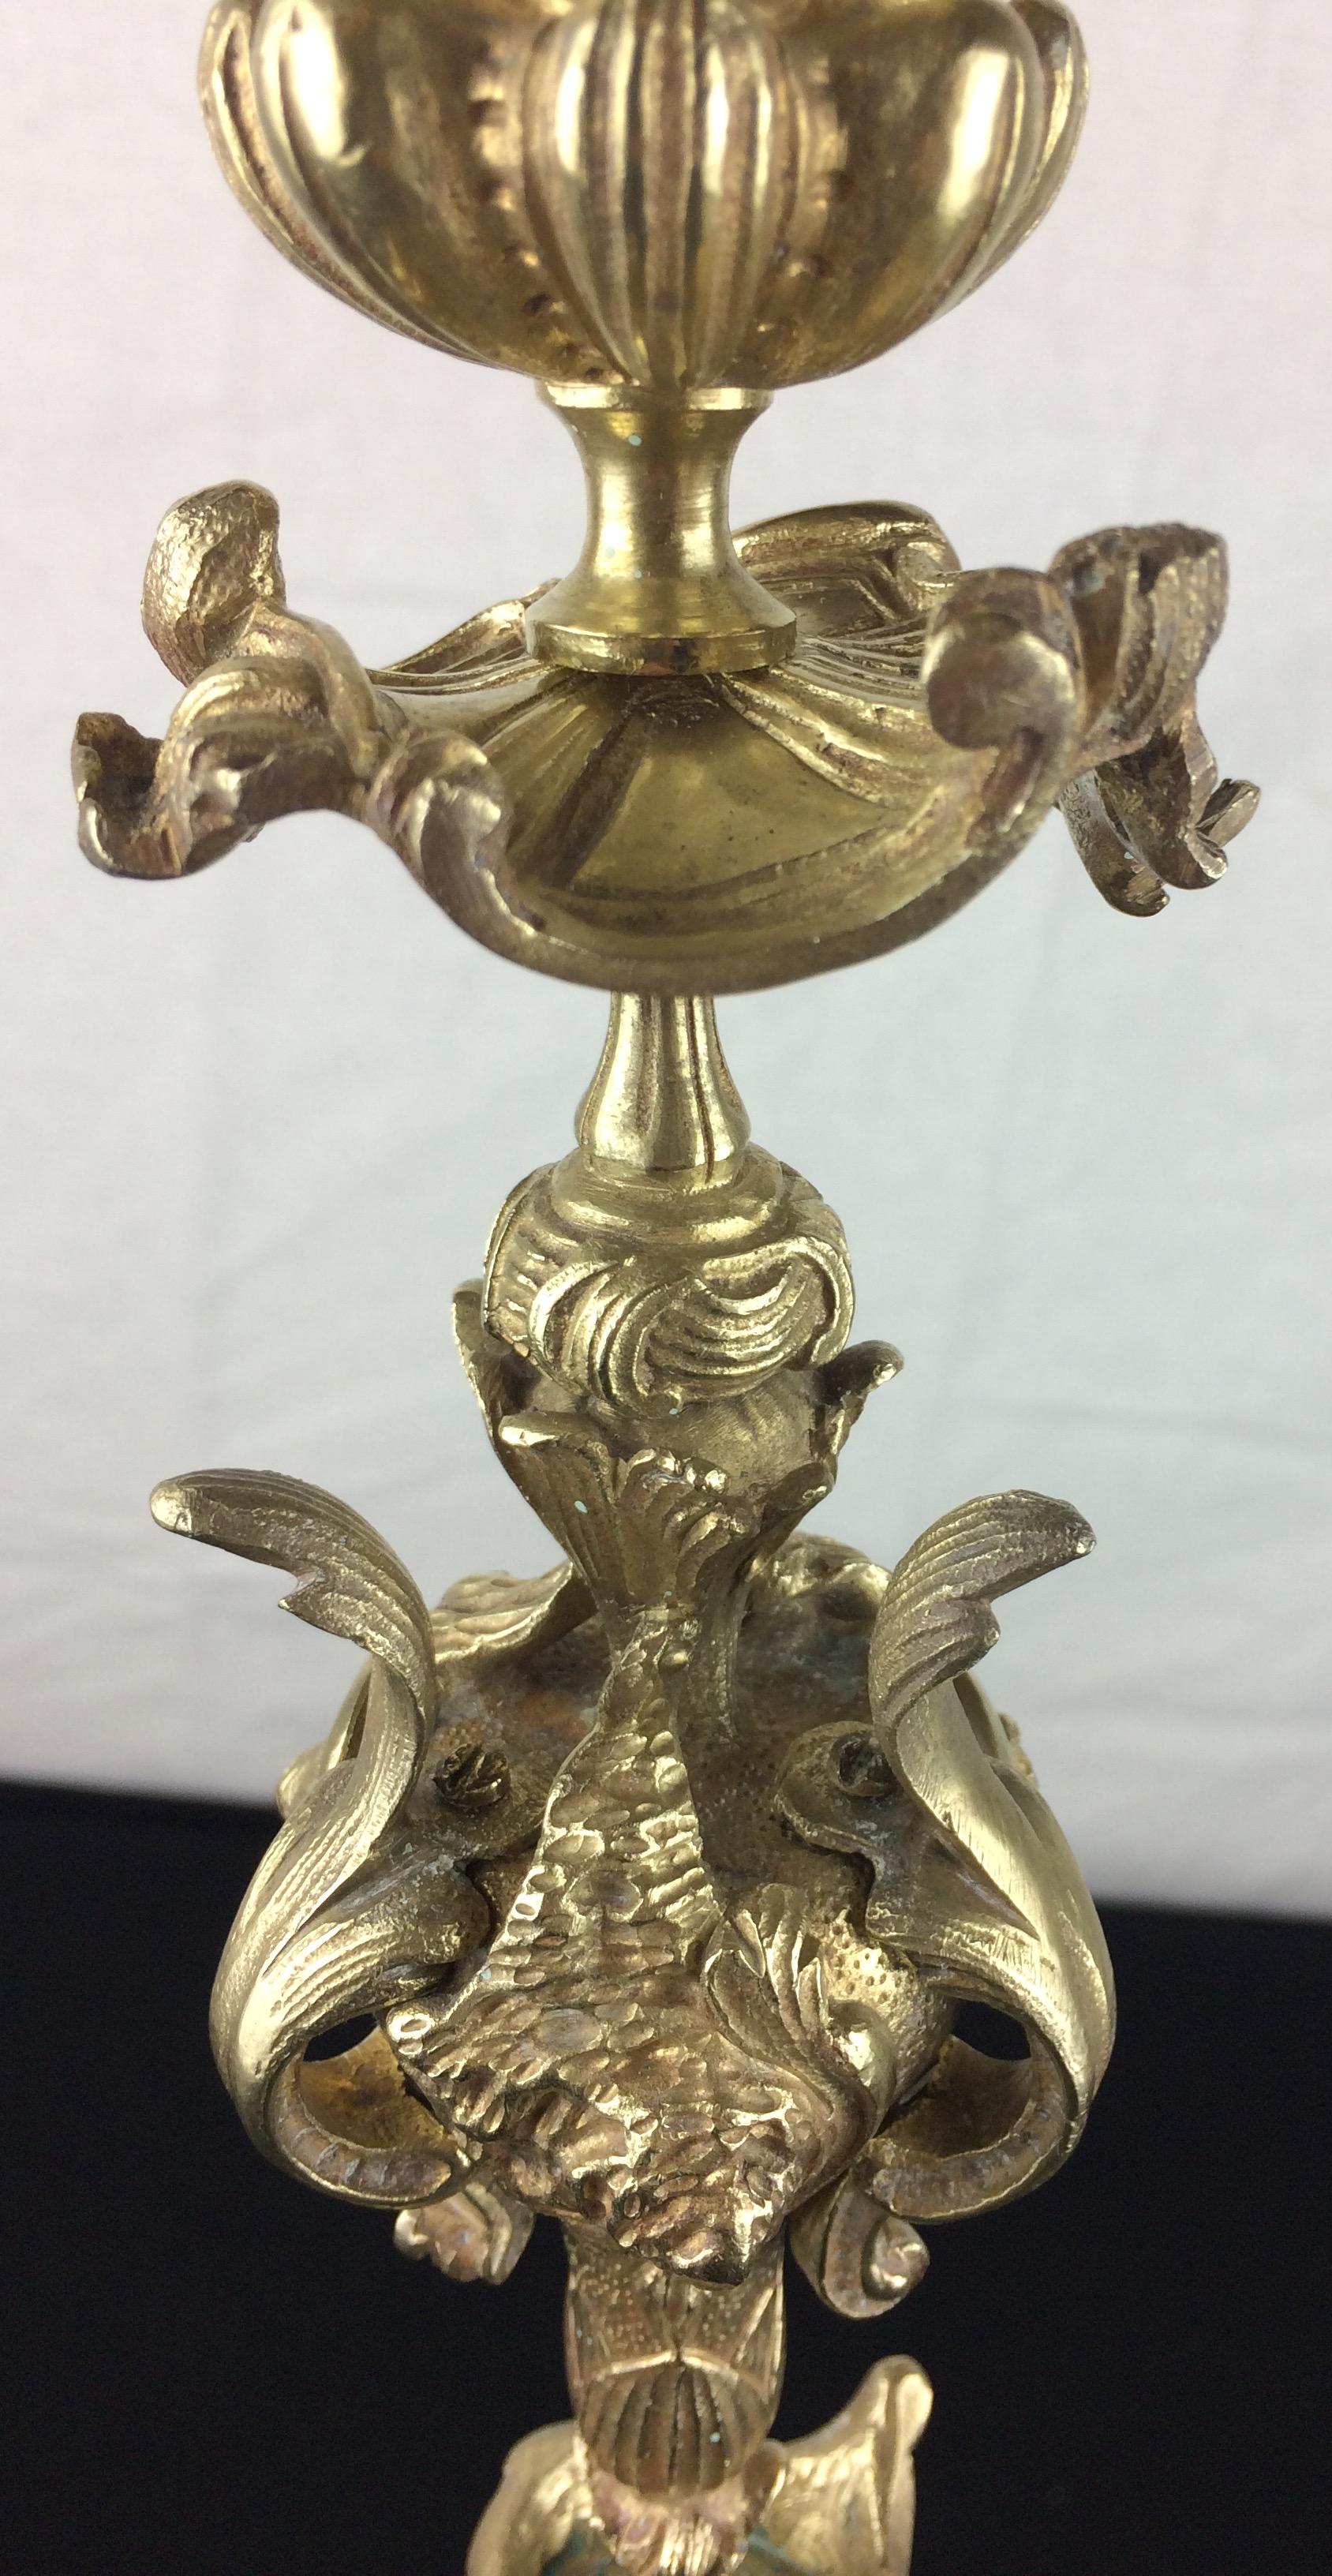 Very Fine Pair of 19th Century French Gilt Bronze Candelabras by Victor Raulin For Sale 3